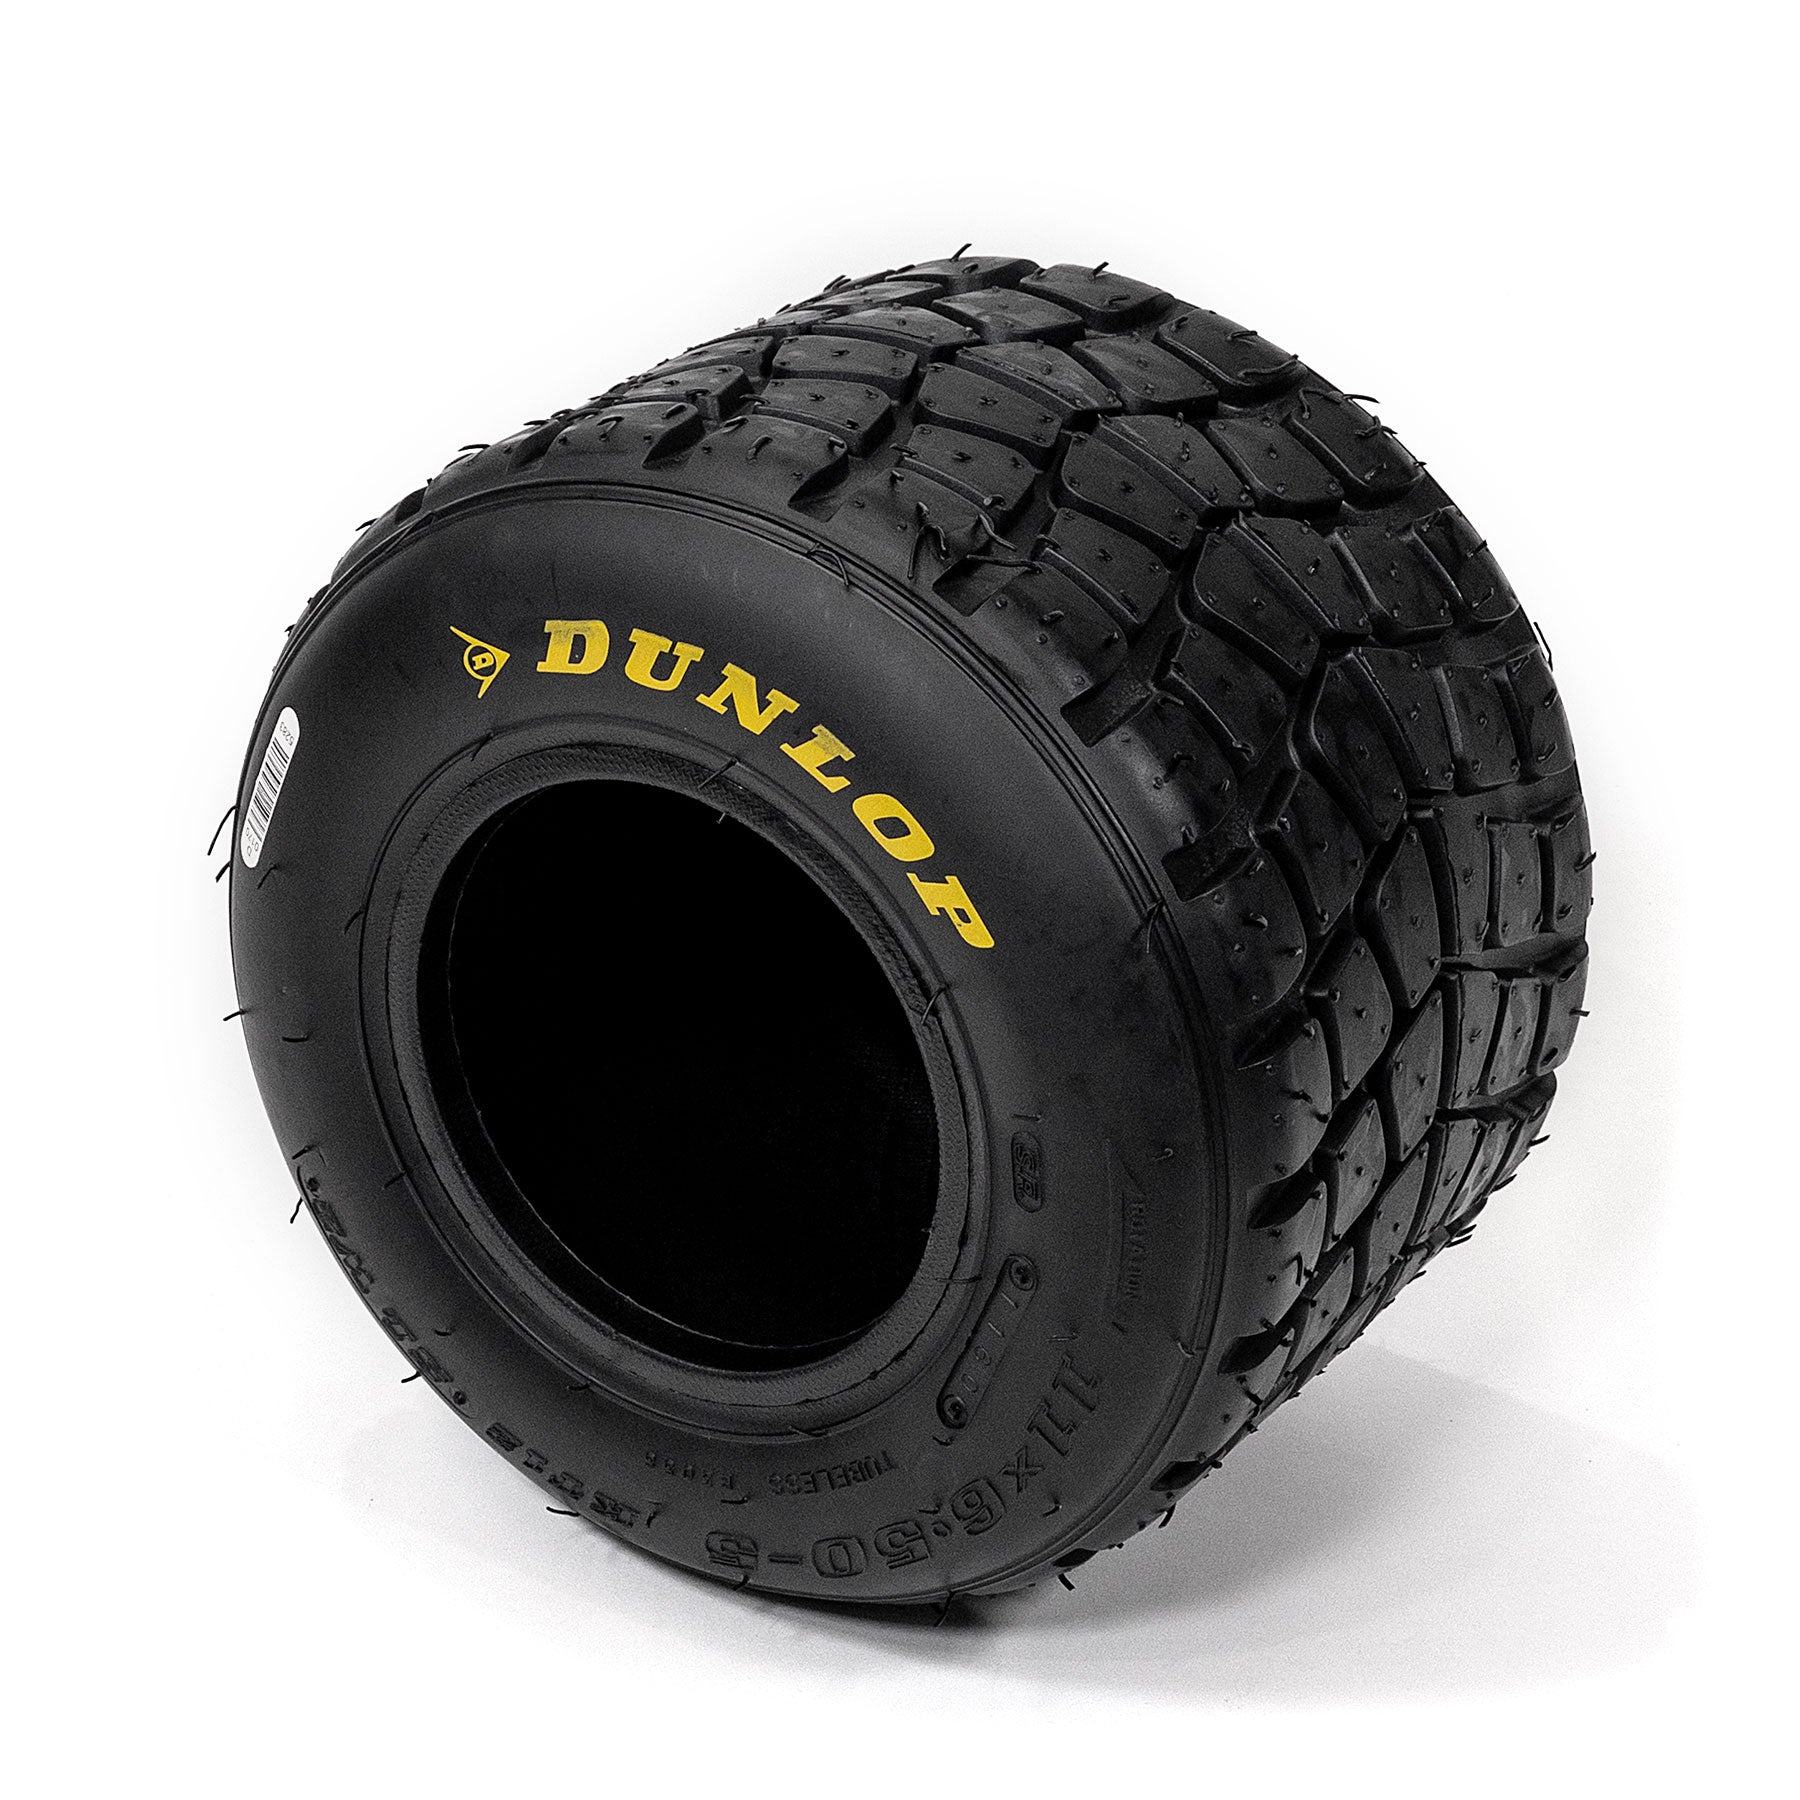 Dunlop Wet Rear Tyre for use in KNSW racing